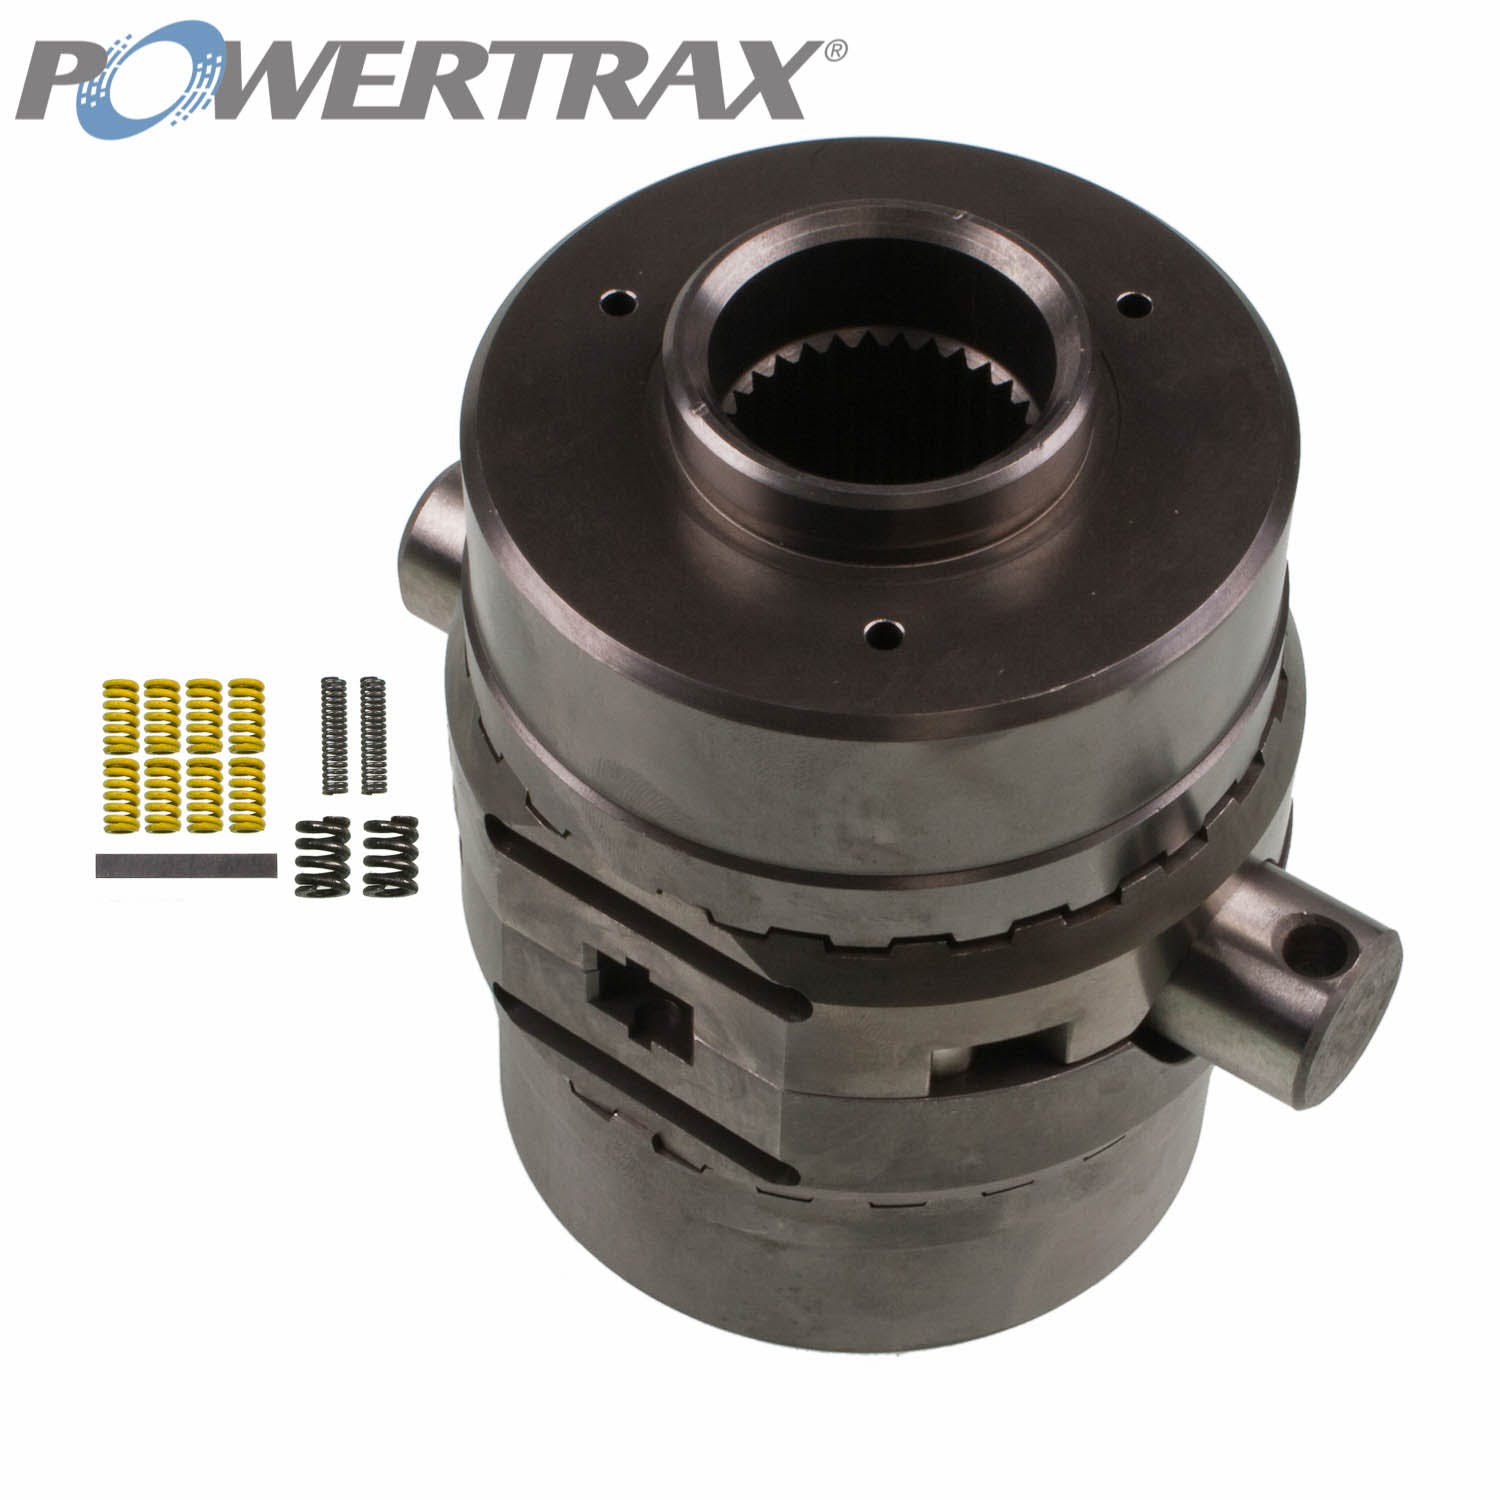 PowerTrax 9206883128 No-Slip Traction System